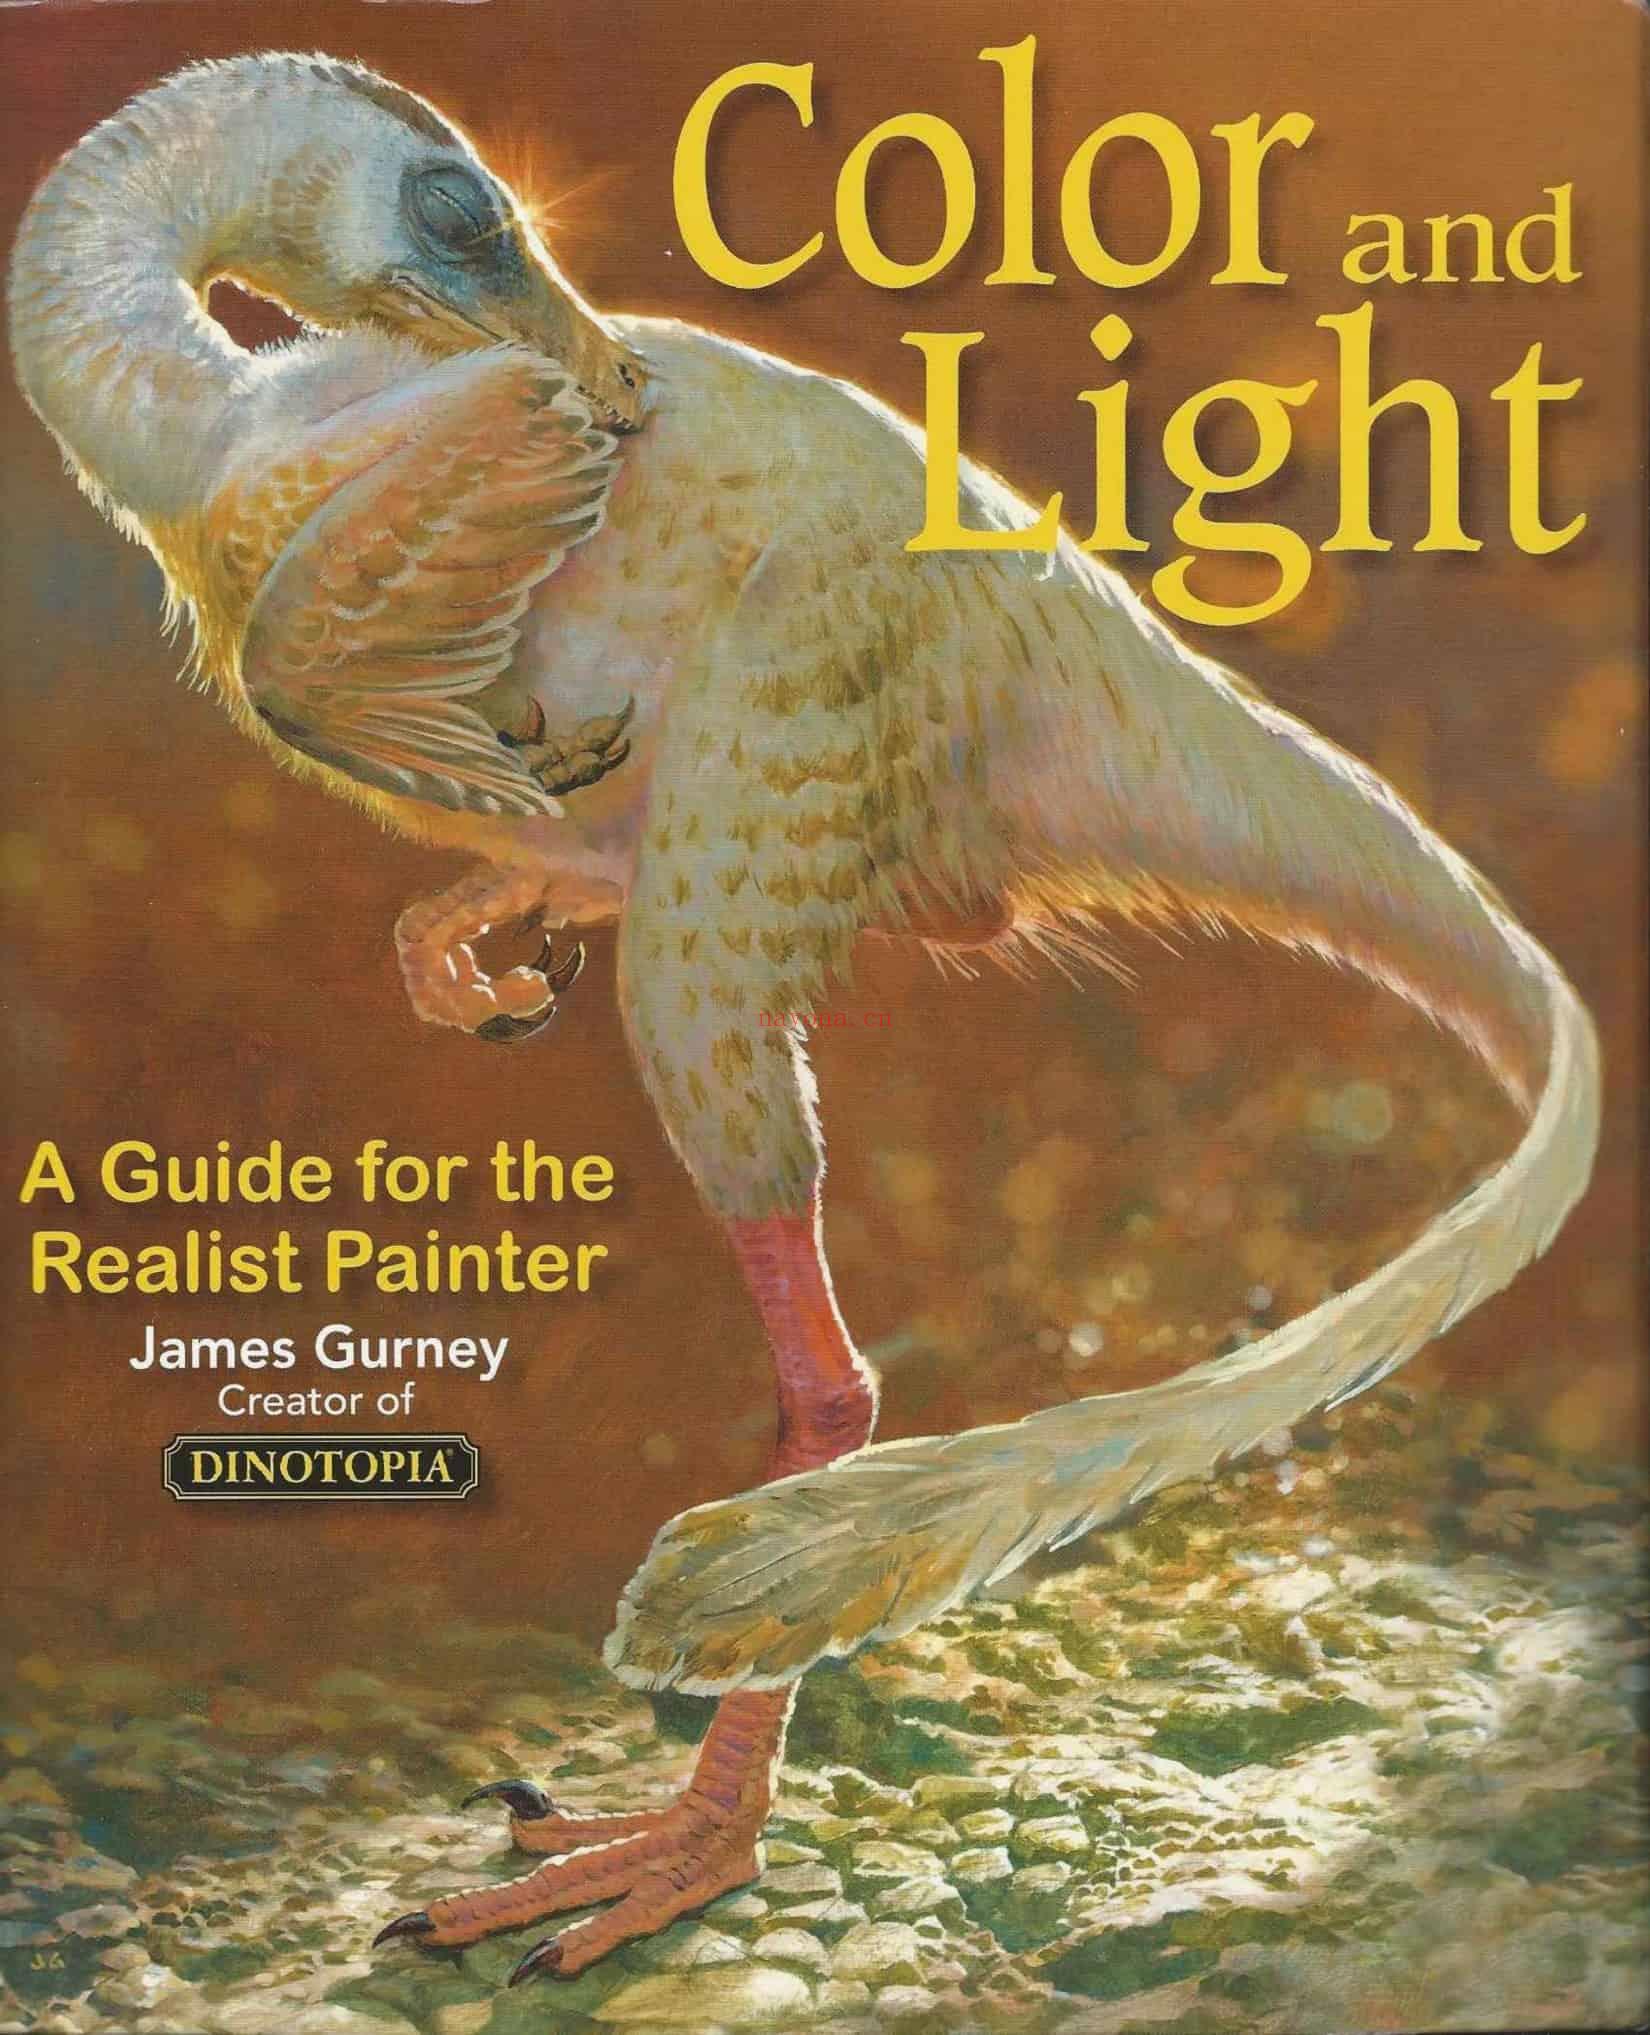 Color and Light - A Guide for the Realist Painter